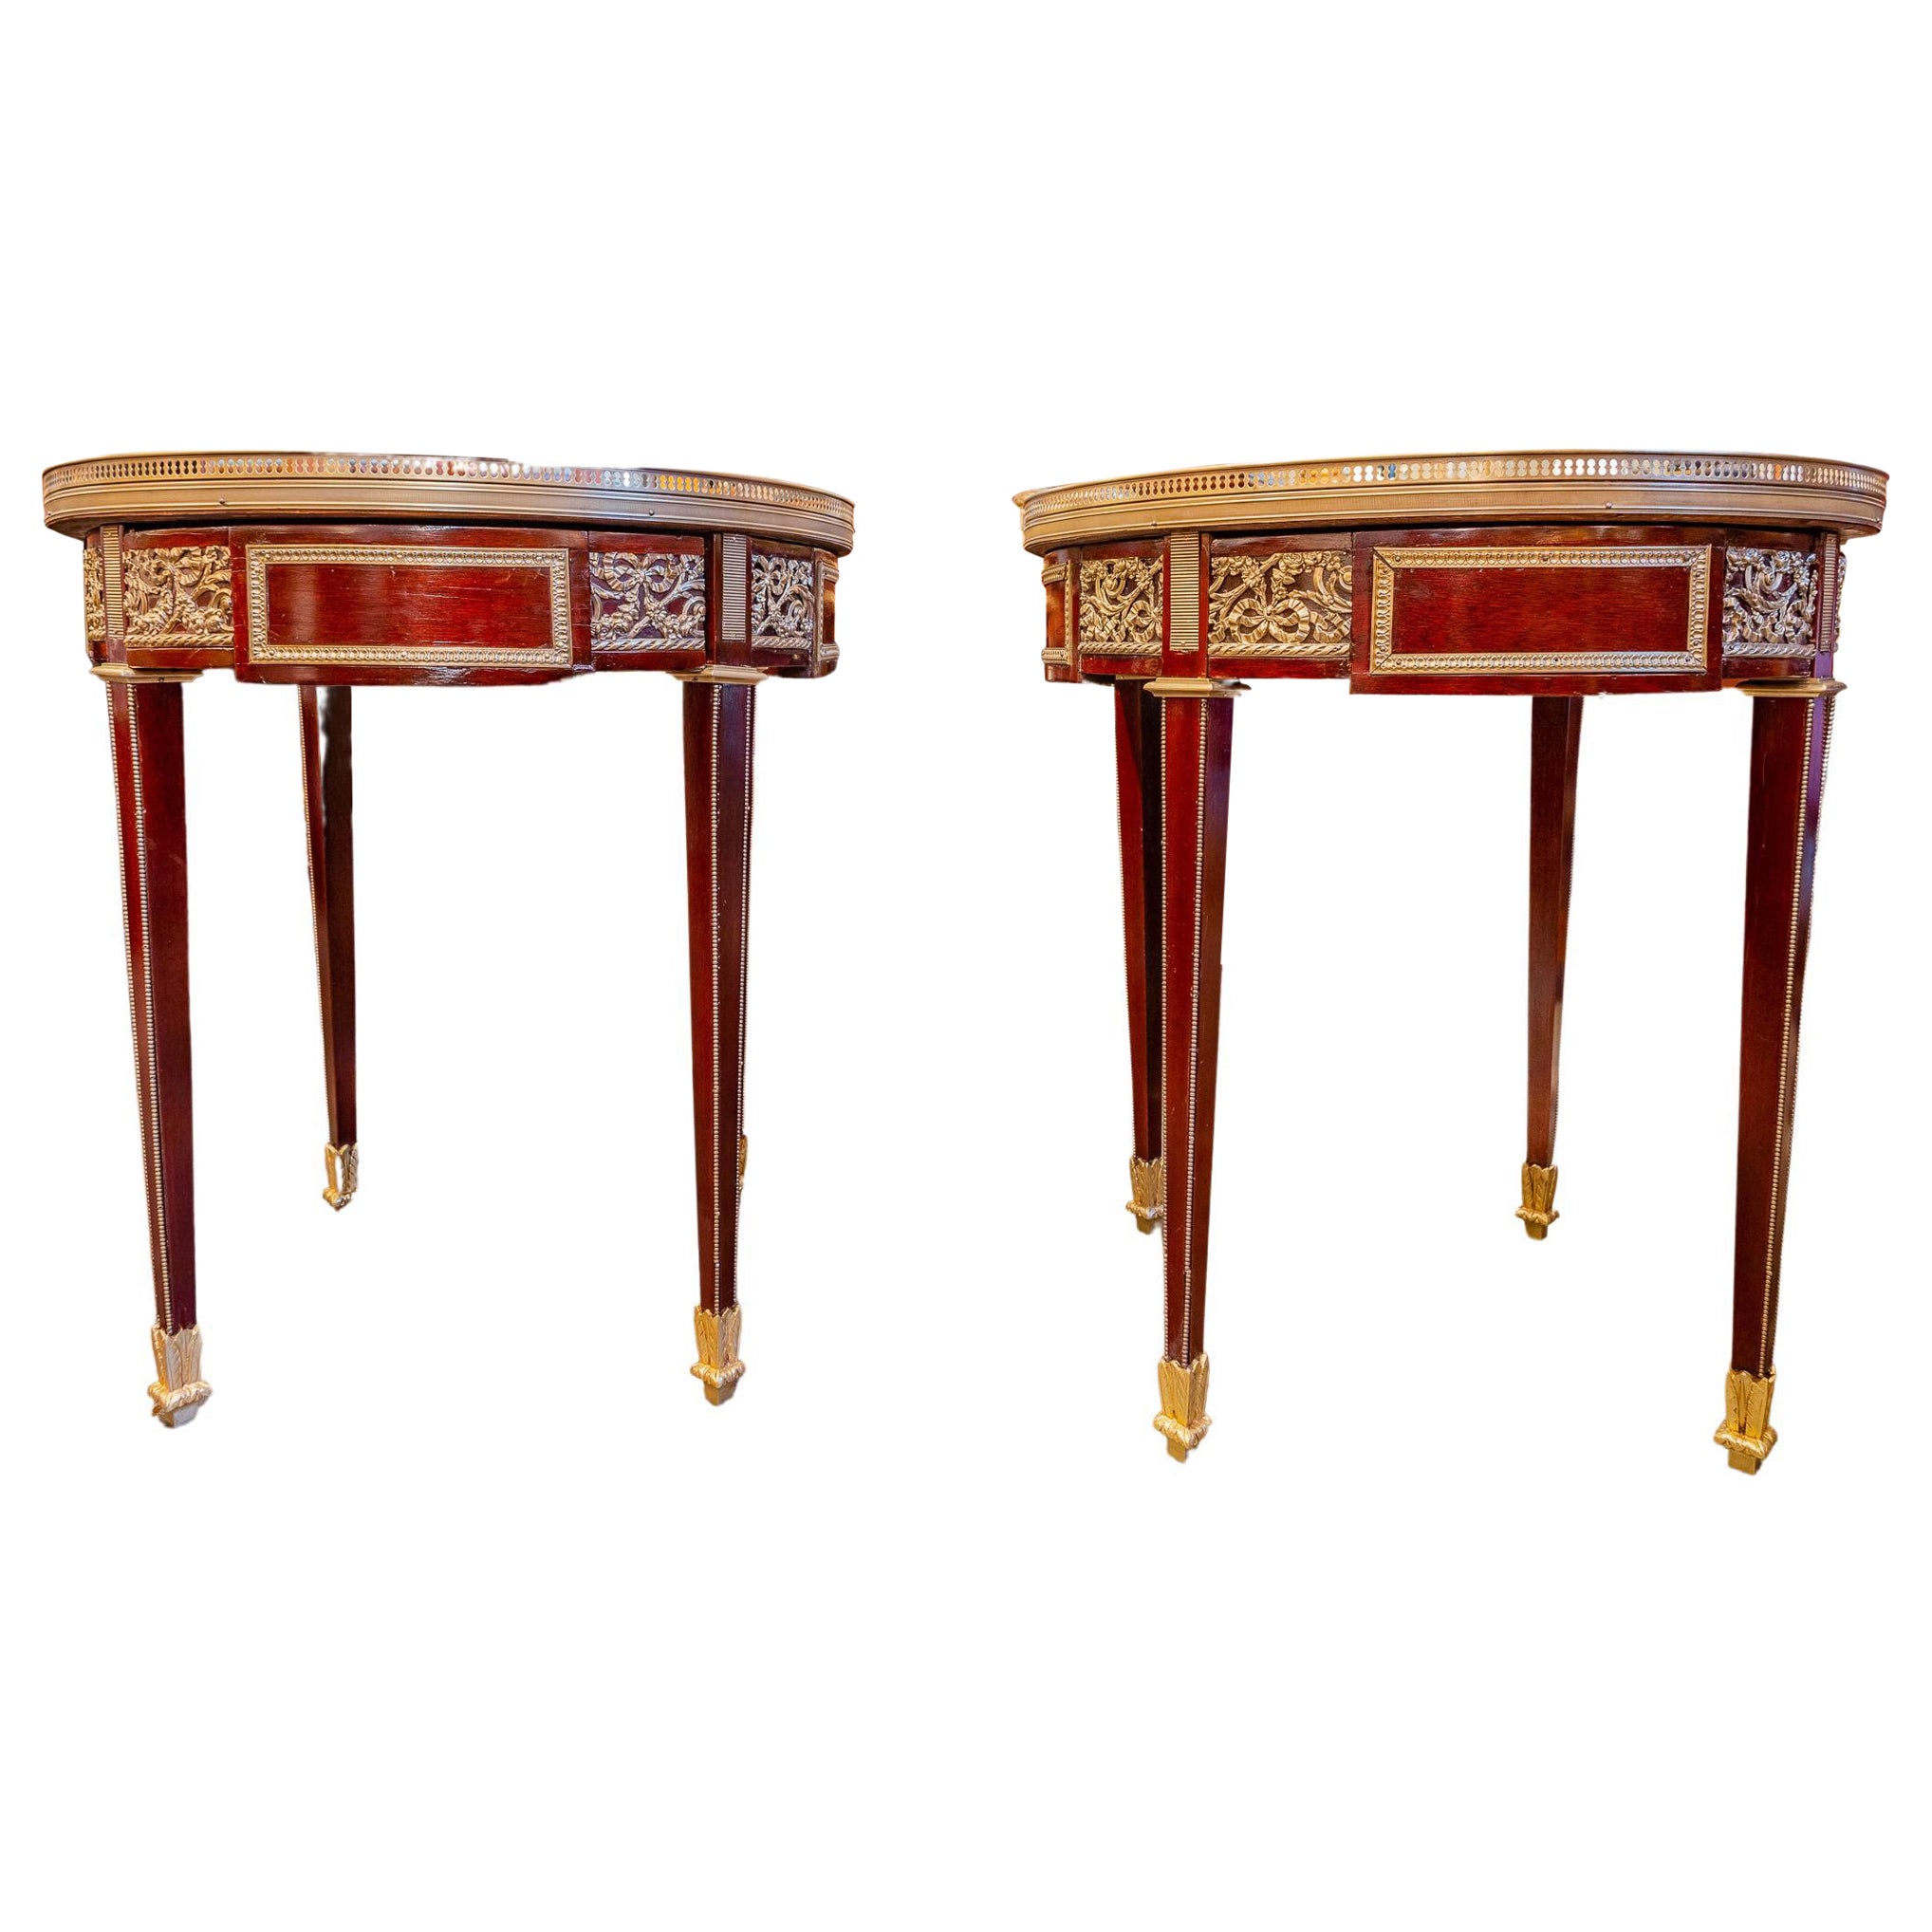 Pair of Late 19th C Louis XVI Mahogany and Gilt Bronze Marble Top Gueridons